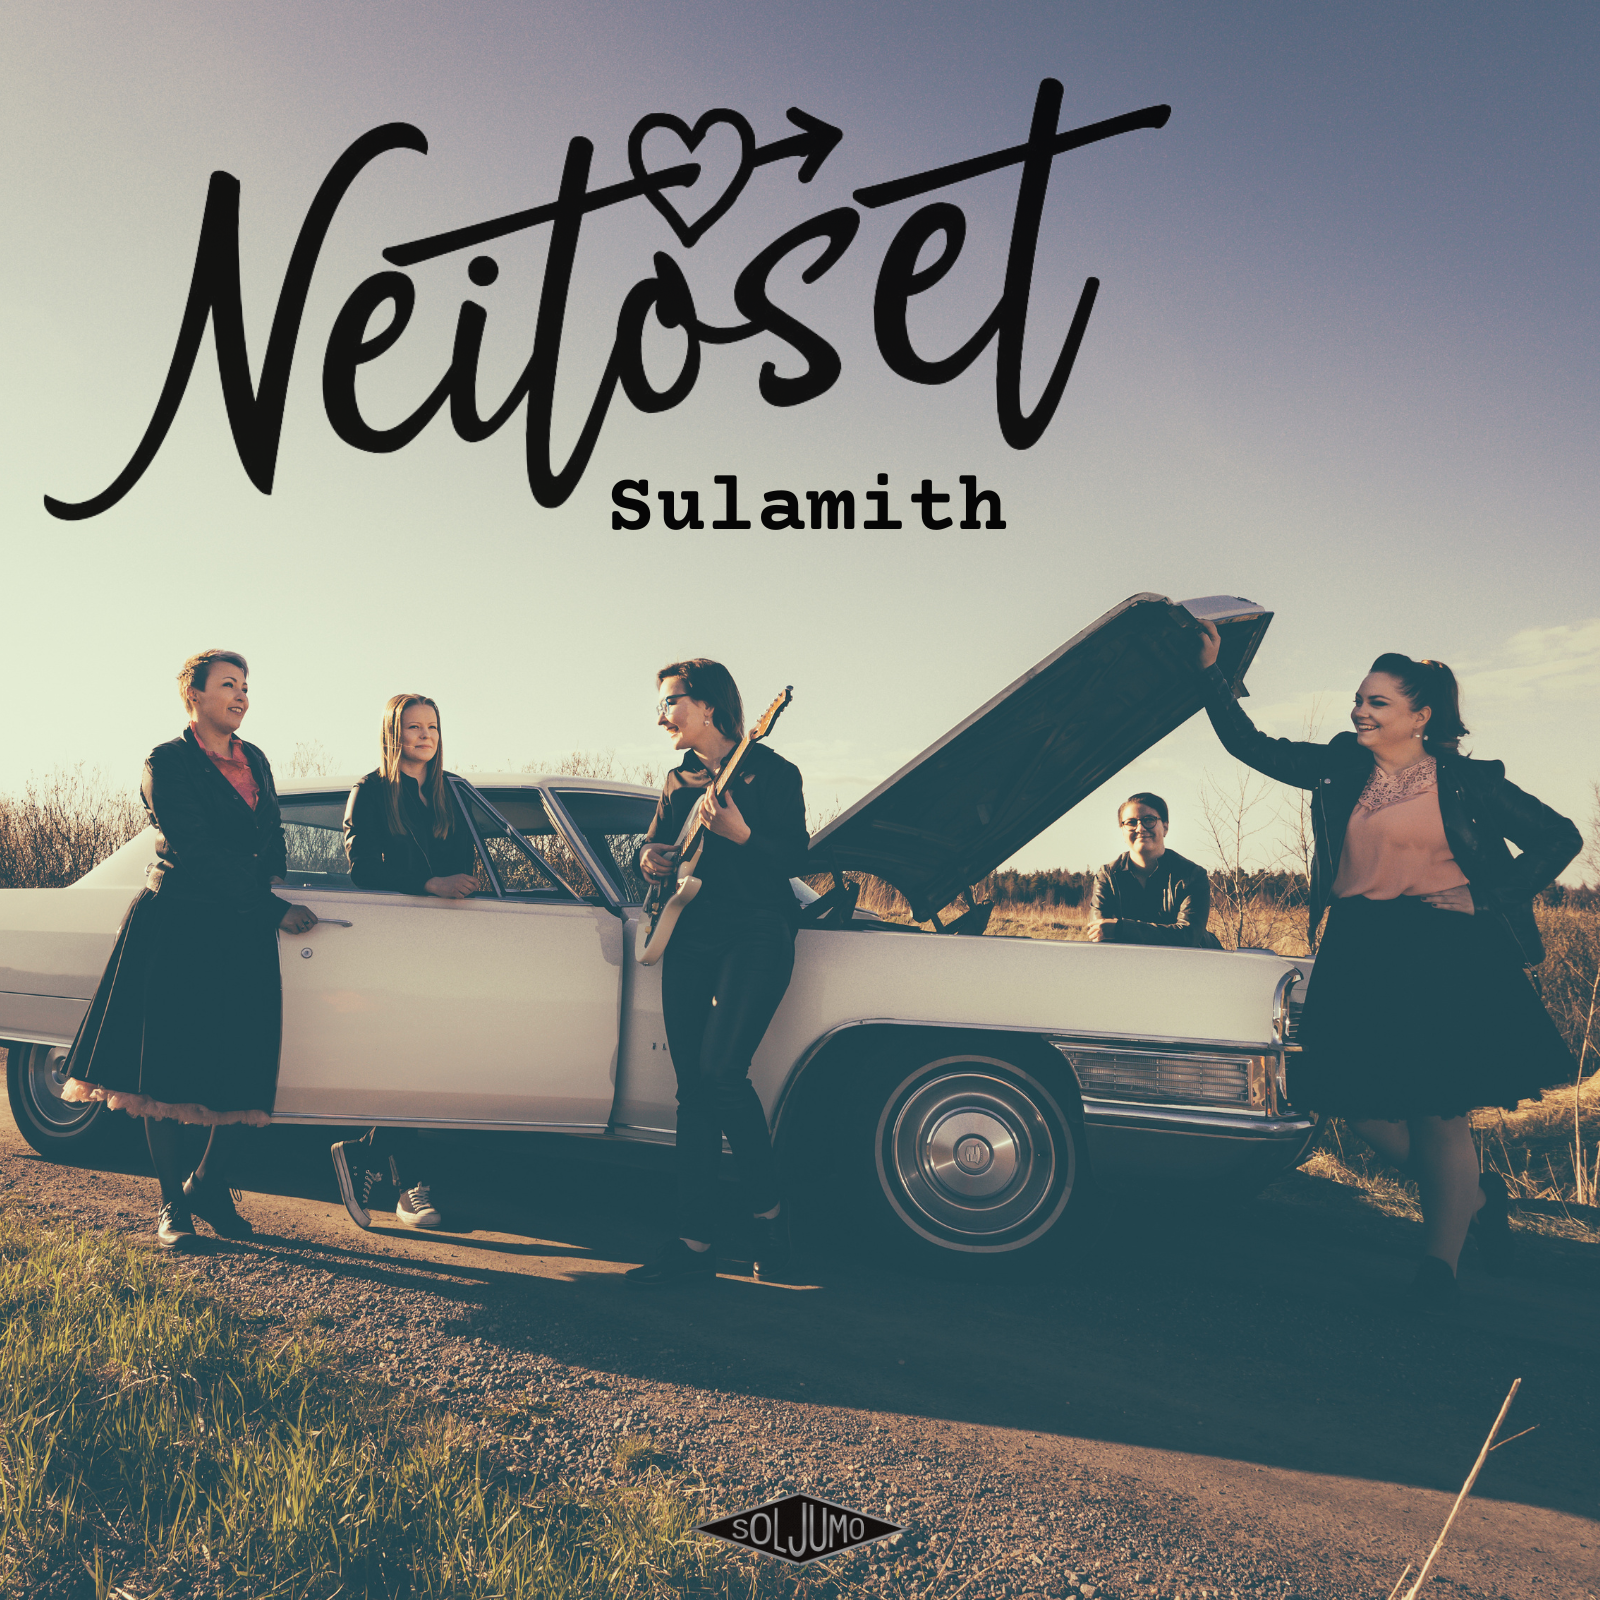 You are currently viewing Neitoset – Sulamith